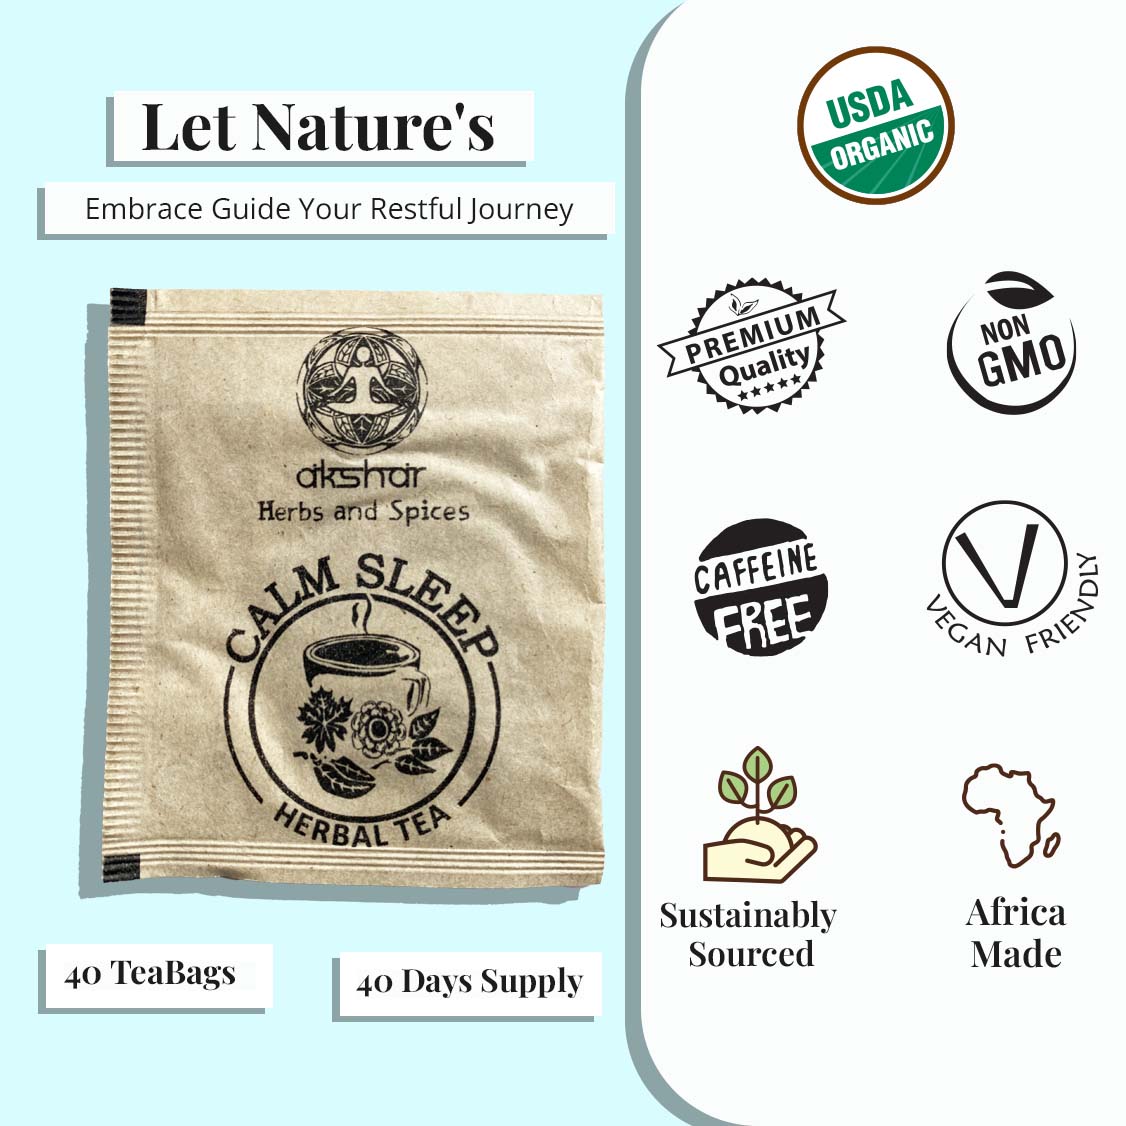 
                  
                    Let Nature's Embrace Guide your Restful Journey : USDA ORGANIC , PREMIUM QUALITY, NON GMO , VEGAN FRIENDLY , AFRICA MADE
                  
                